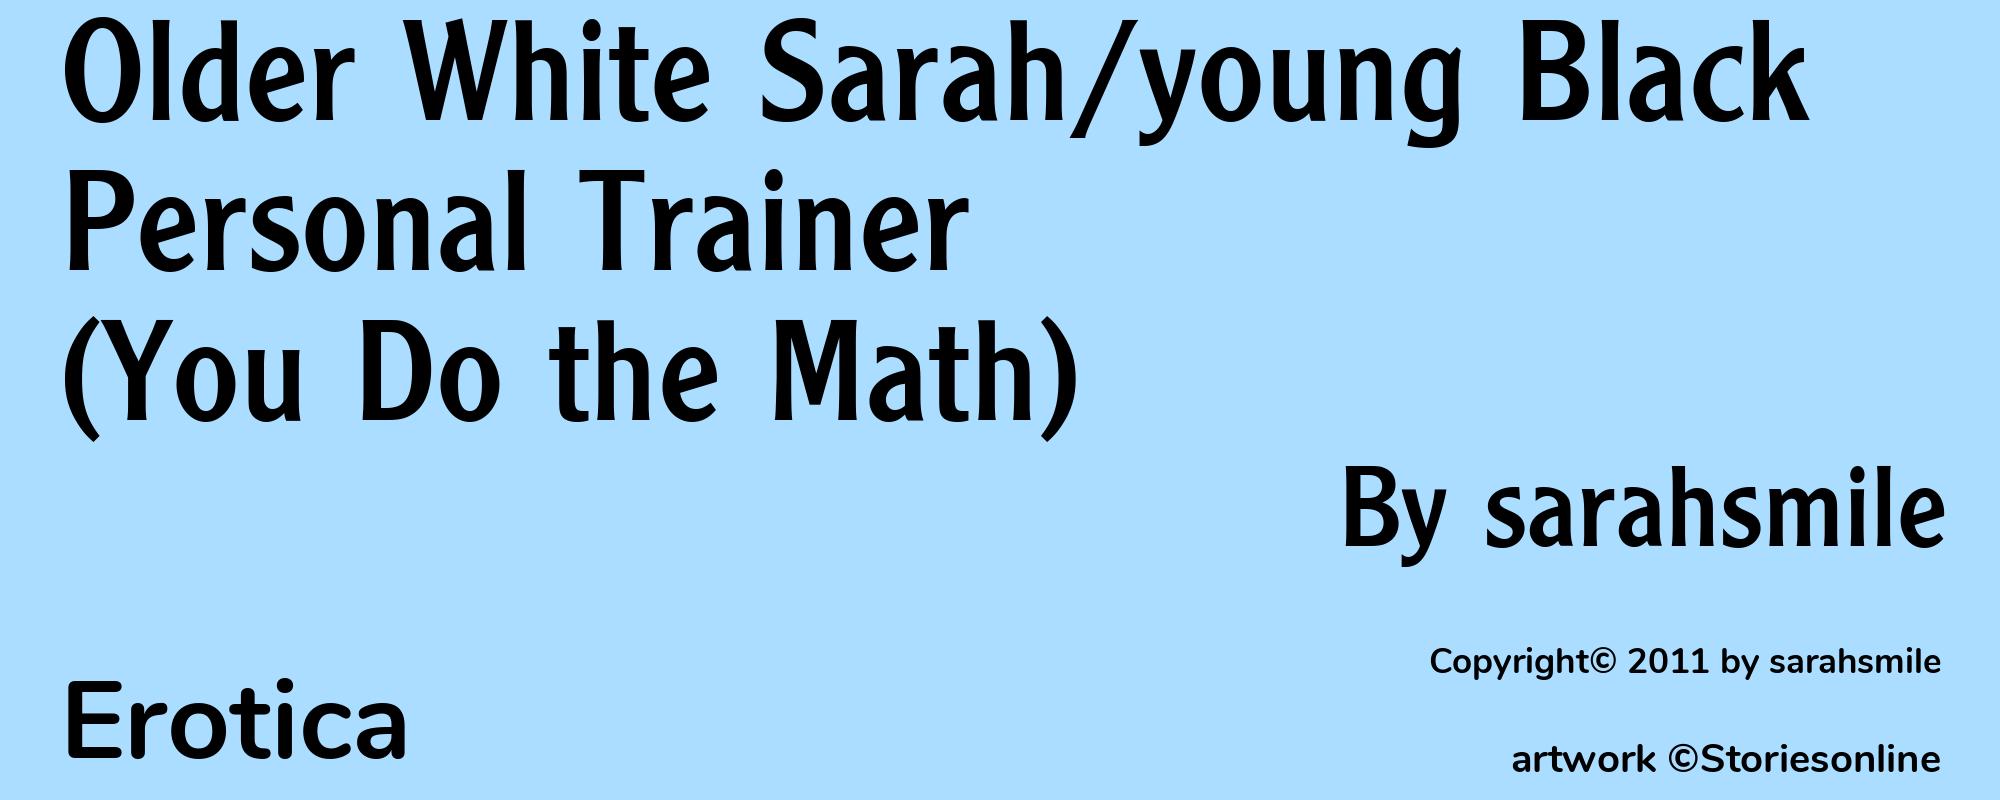 Older White Sarah/young Black Personal Trainer (You Do the Math) - Cover